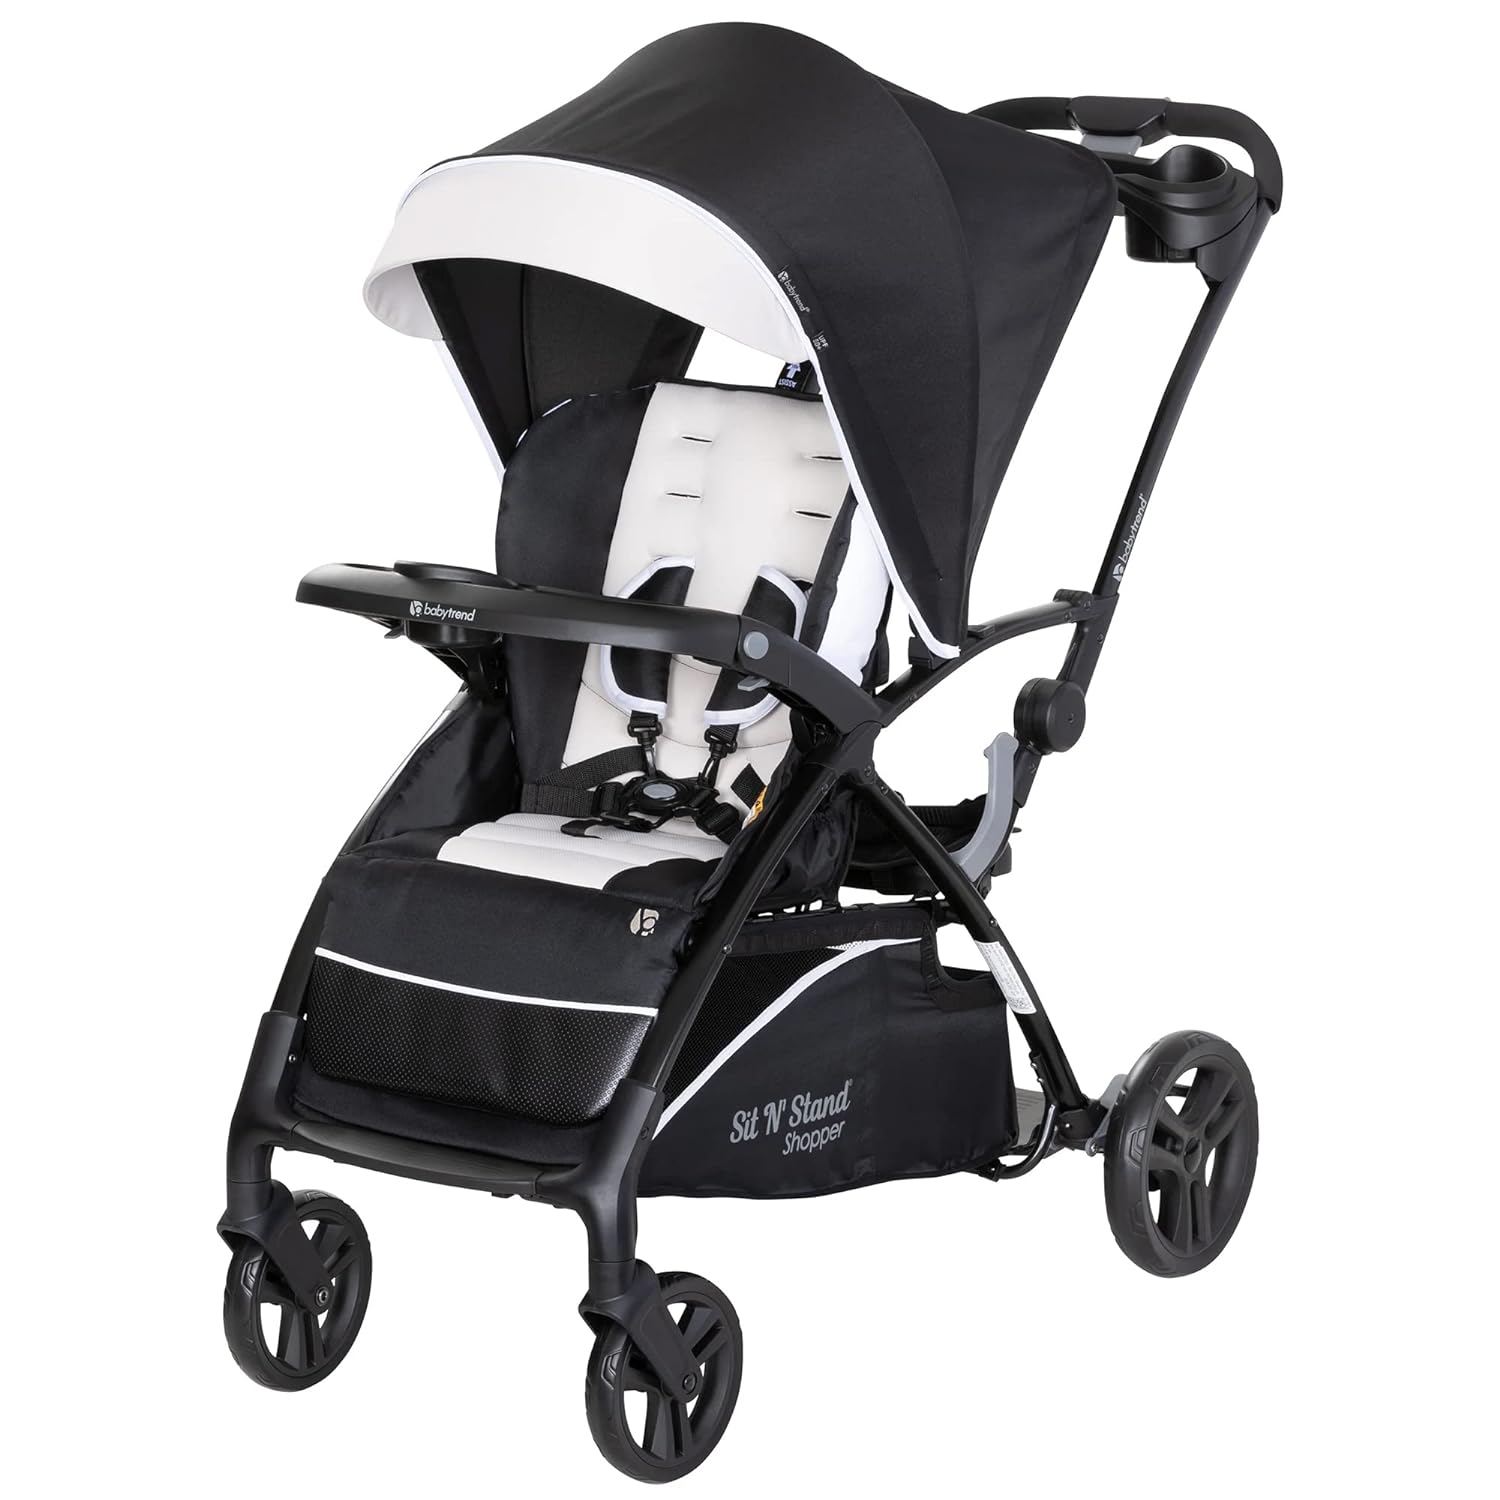 Baby Trend Sit N' Stand Stroller Review